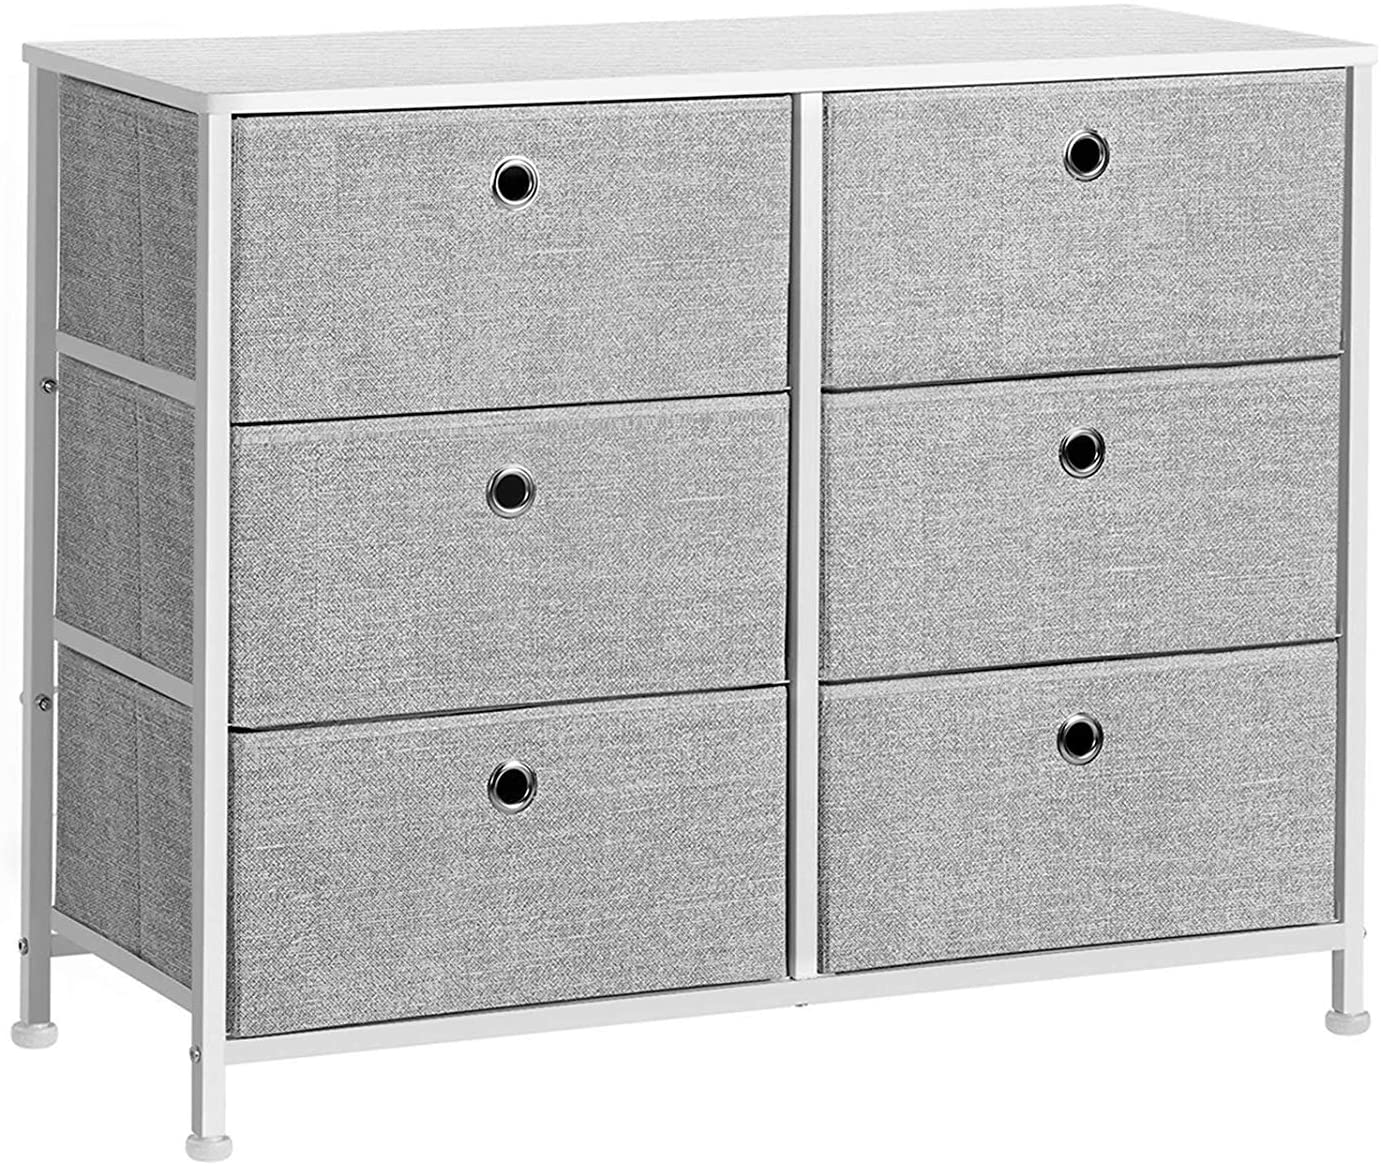 Photo 1 of SONGMICS 3Tier Closet Drawer Storage Dresser with 6 Easy Pull Fabric Drawers and Wooden Tabletop for Closet Nursery Dorm Room 315 x 118 x 248 Inches Light Gray and White ULTS23W